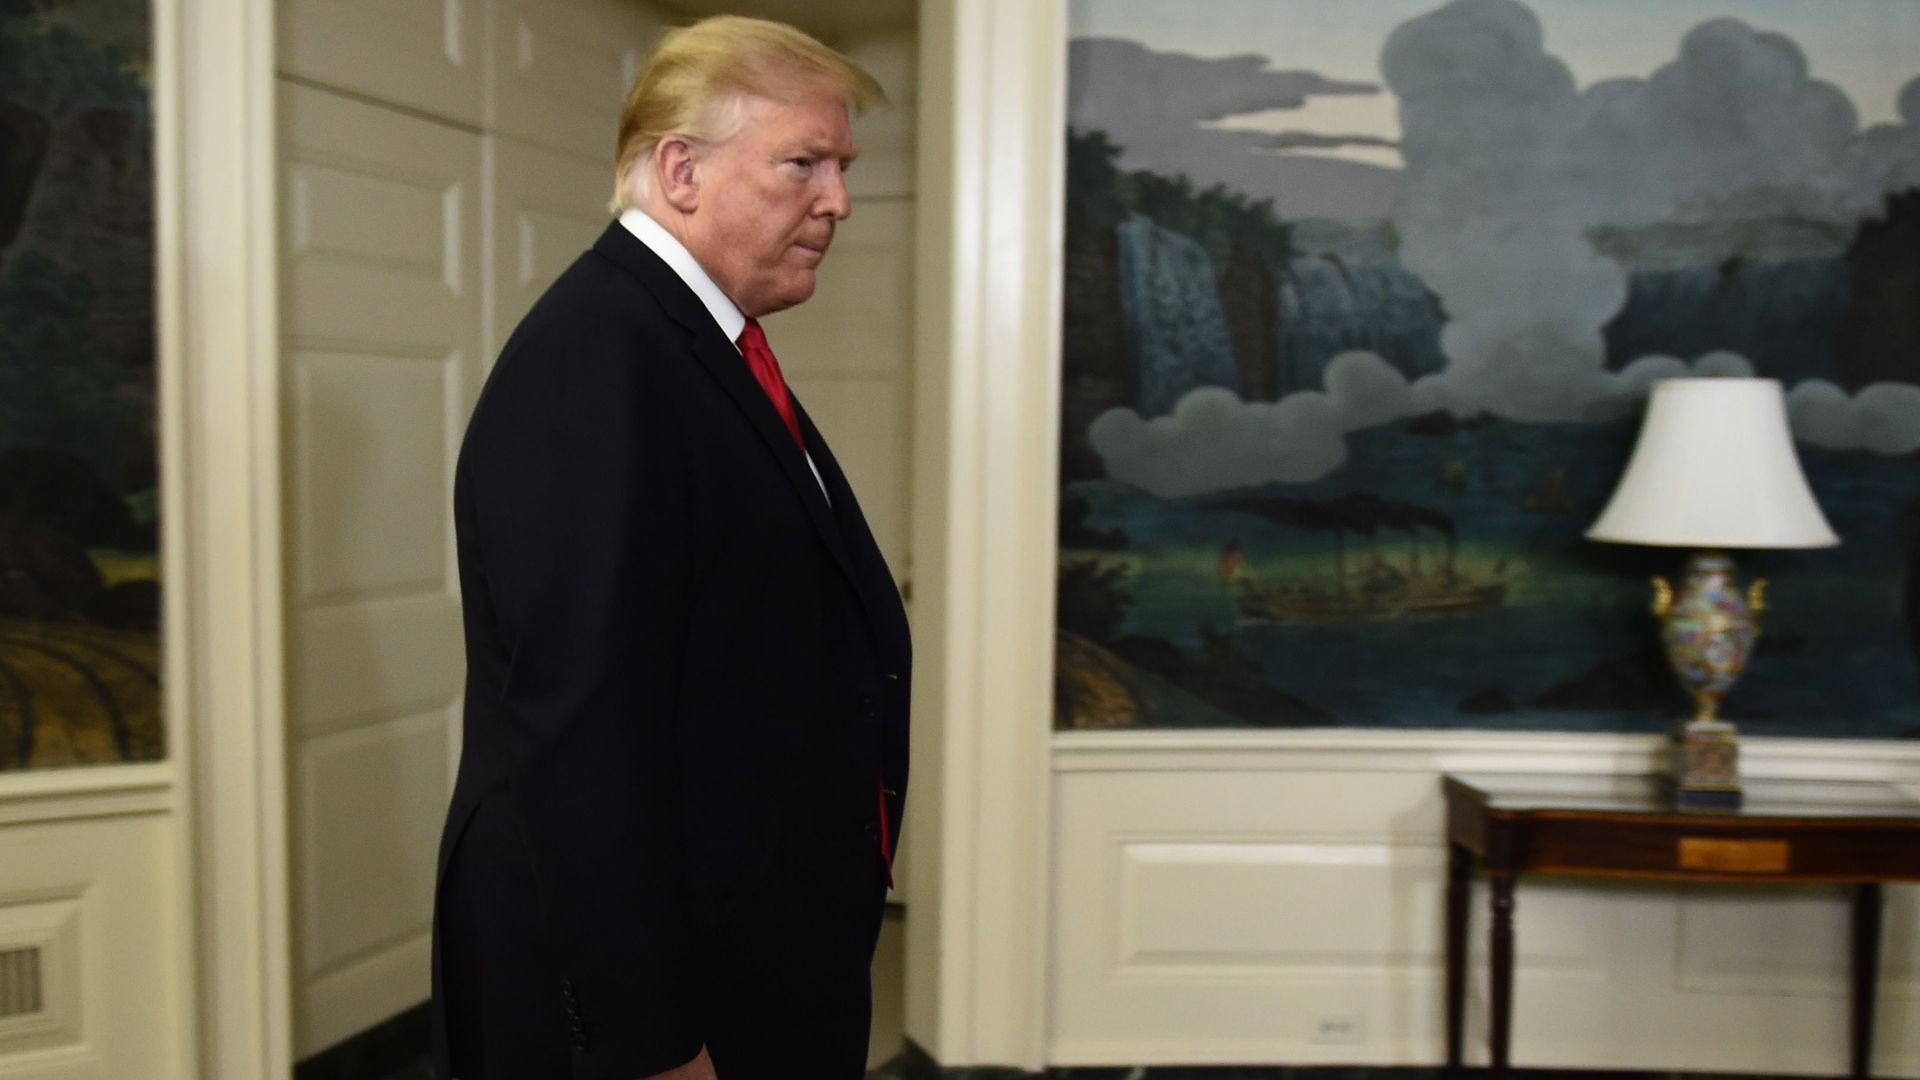 President Trump standing in oval office